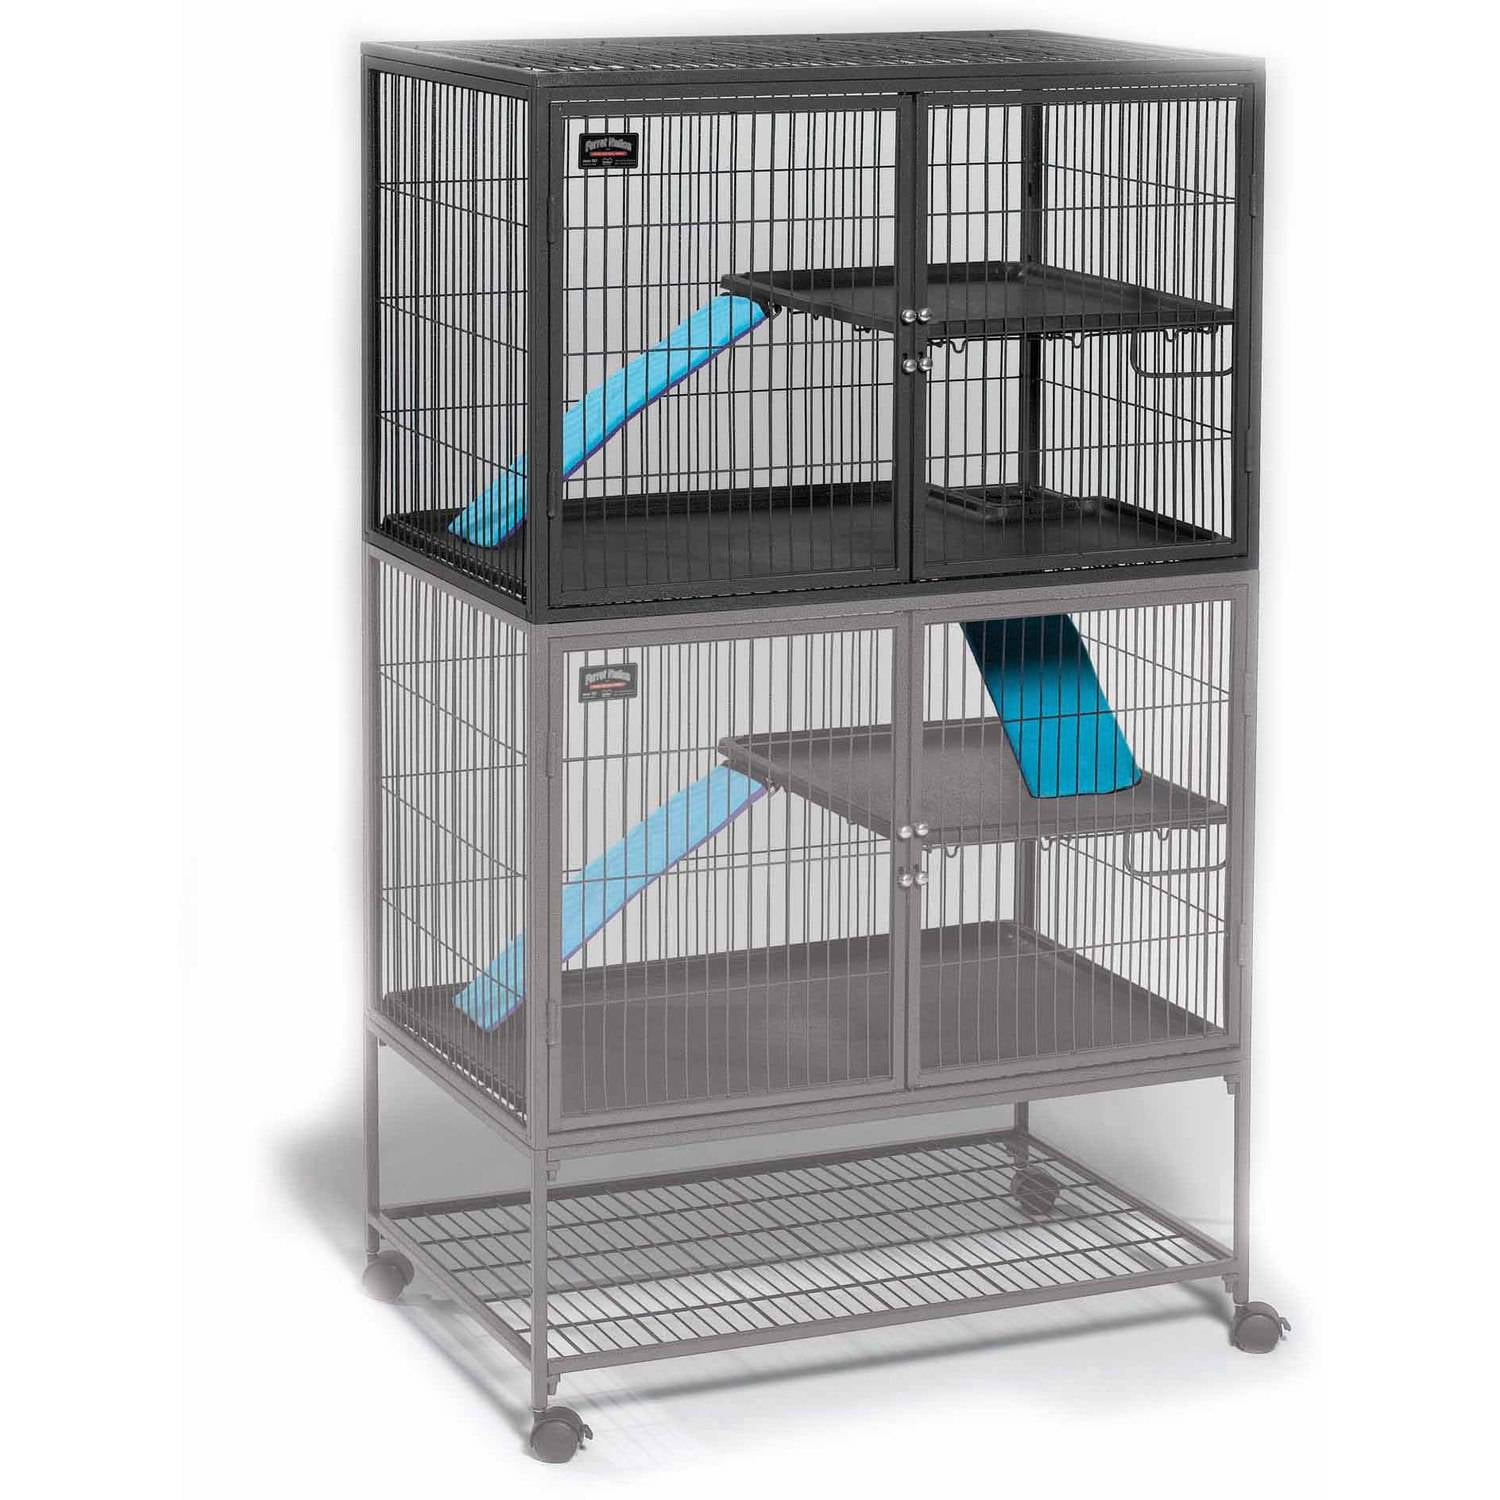 triple critter nation cage